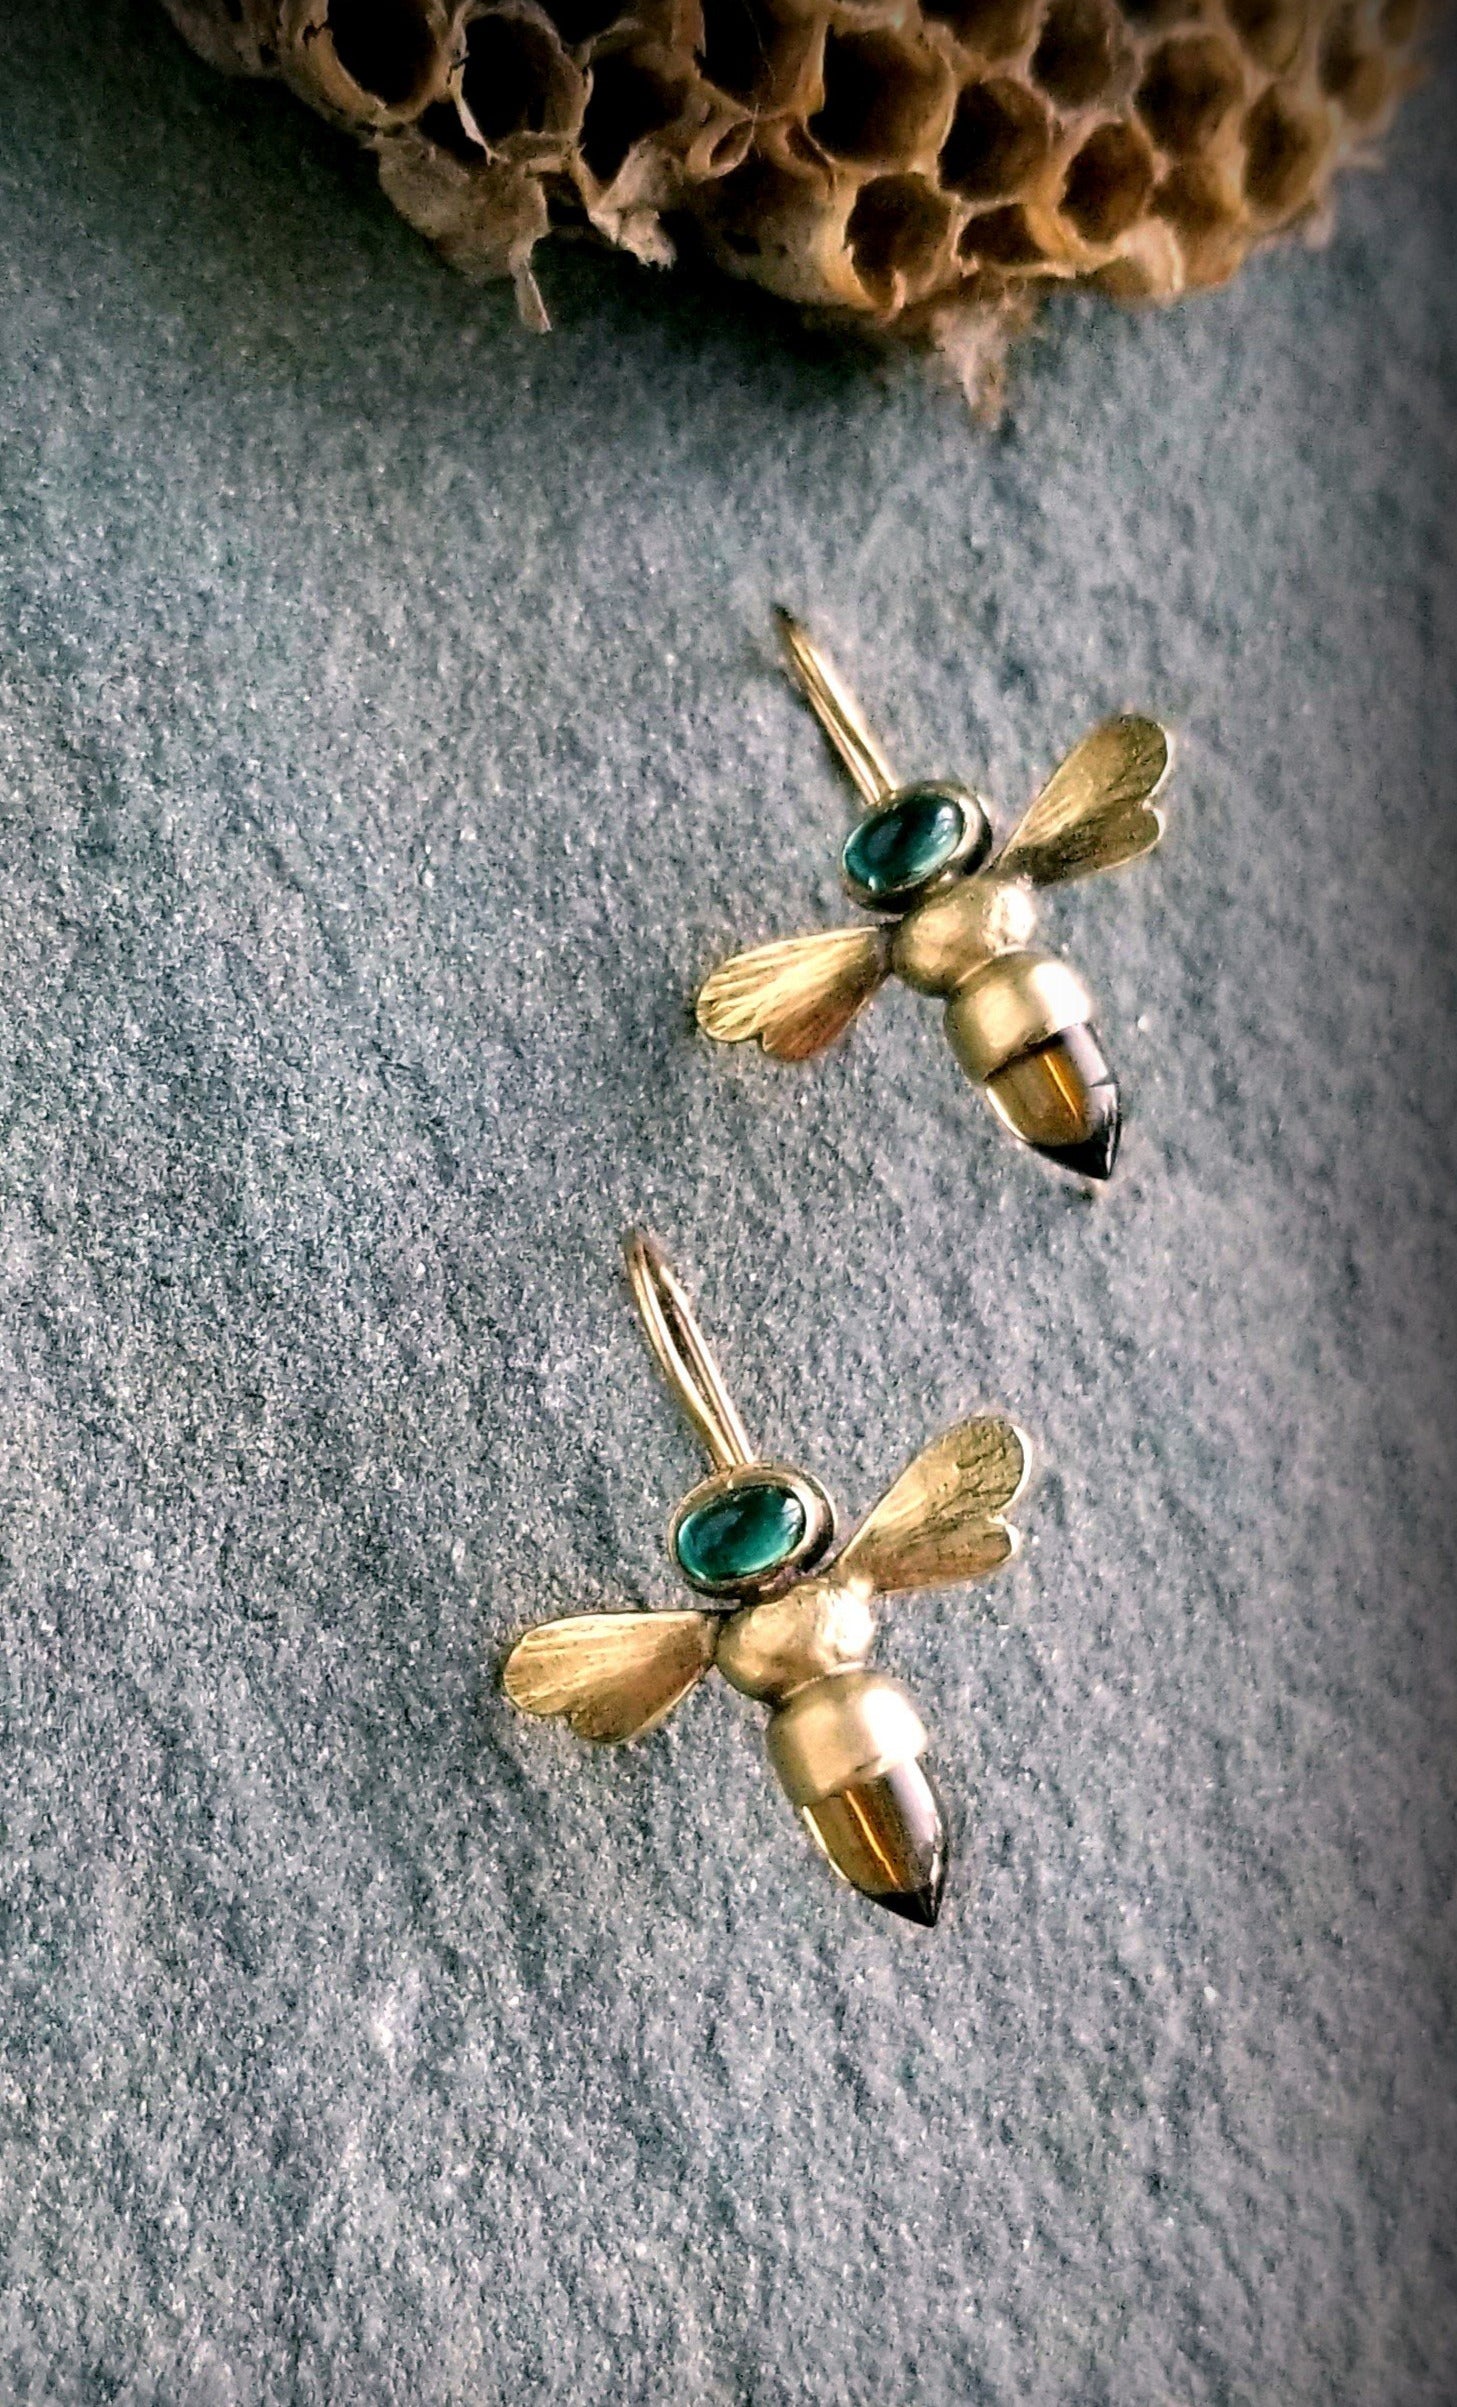 18k Honeybee earrings by Tand Brie.  Set with honey Citrine and Green Tourmaline, earwires.